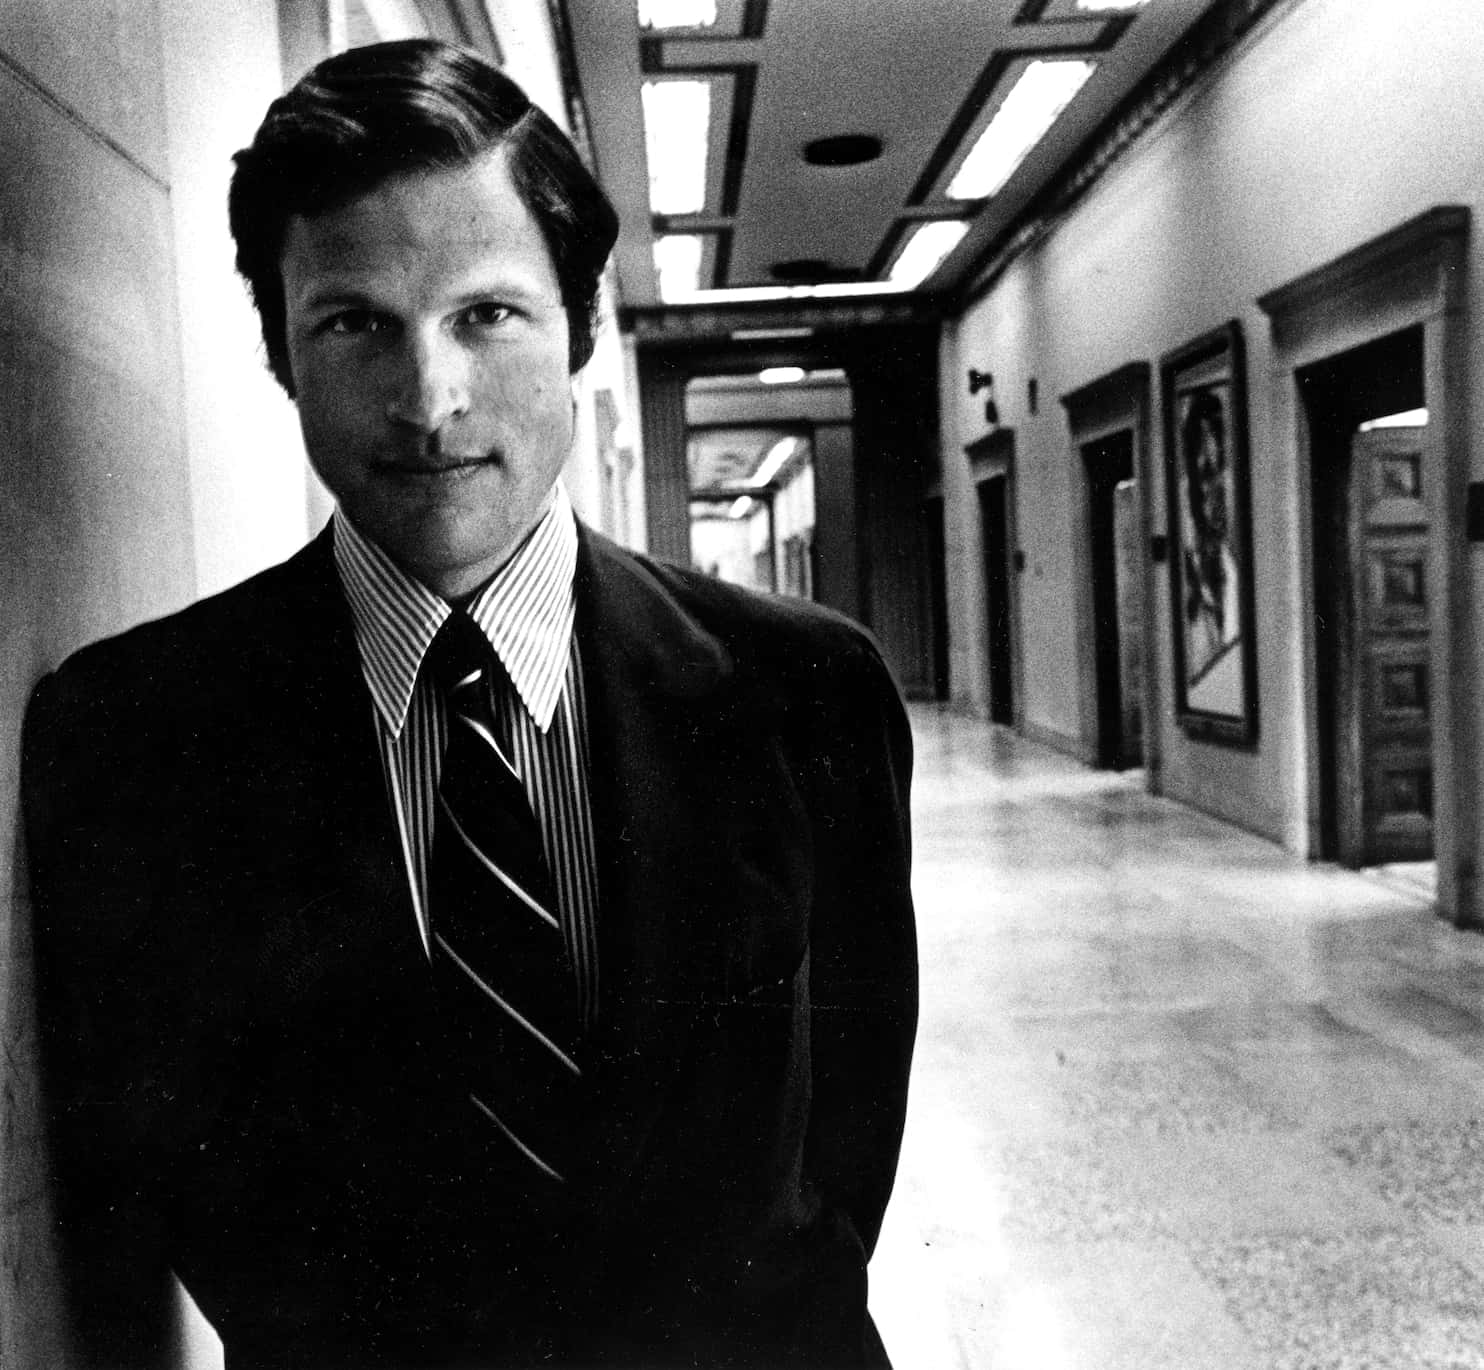 Caption: Portrait of Richard Blumenthal in Black and White Wallpaper